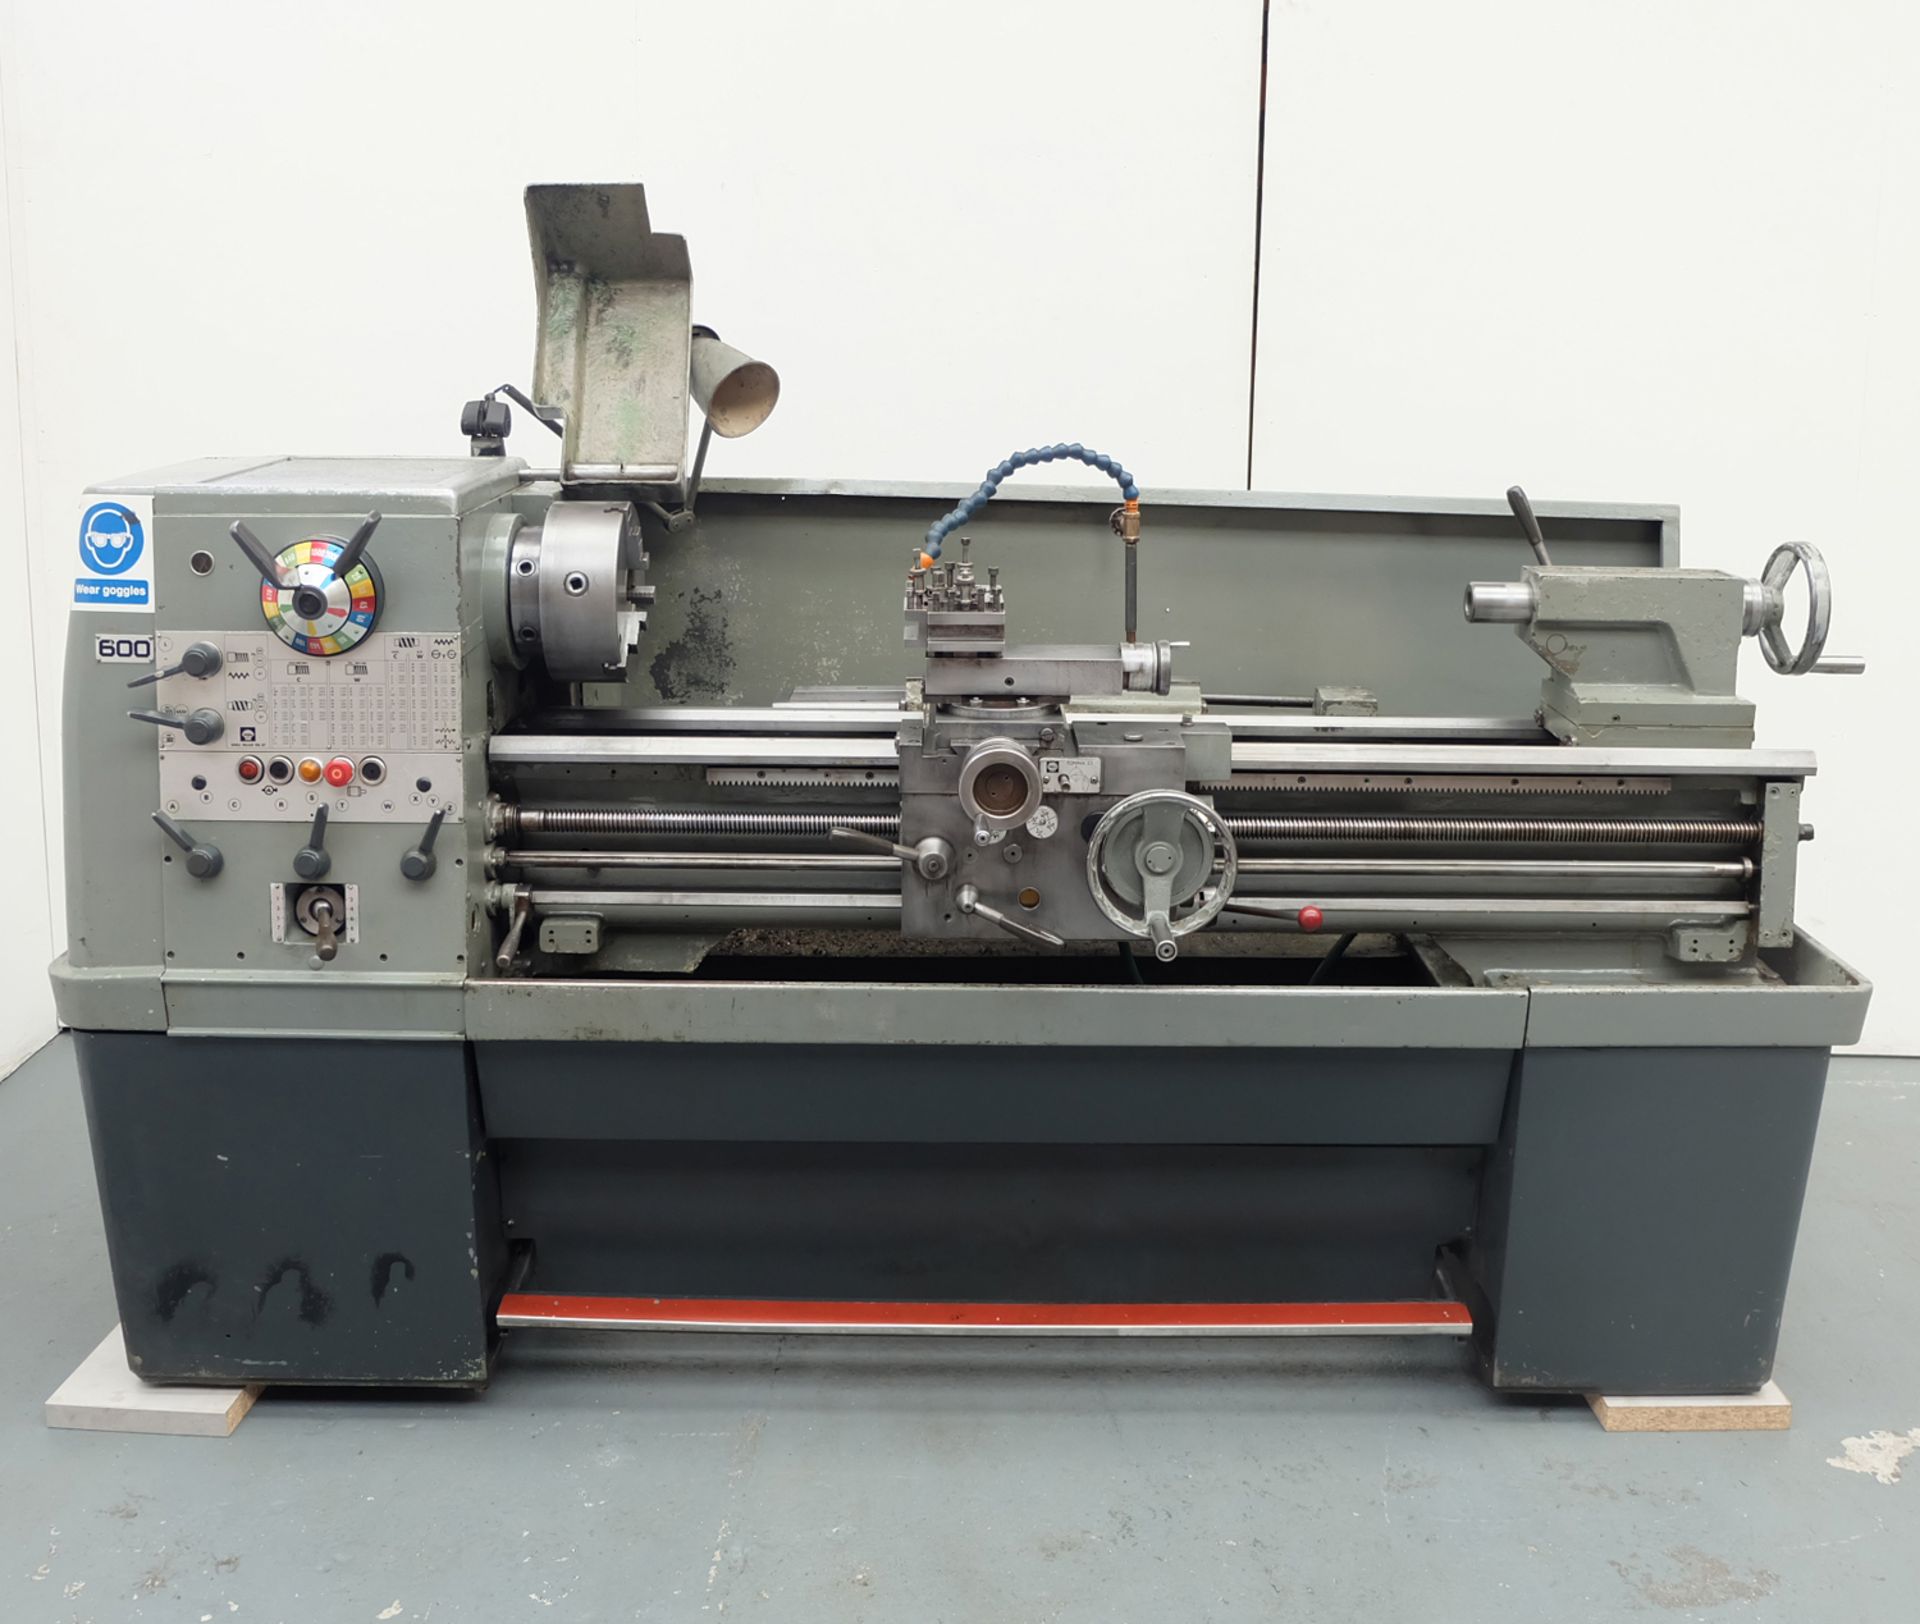 Colchester Triumph 2000. Centre Lathe. Swing Over Bed 15". Between Centres 50".